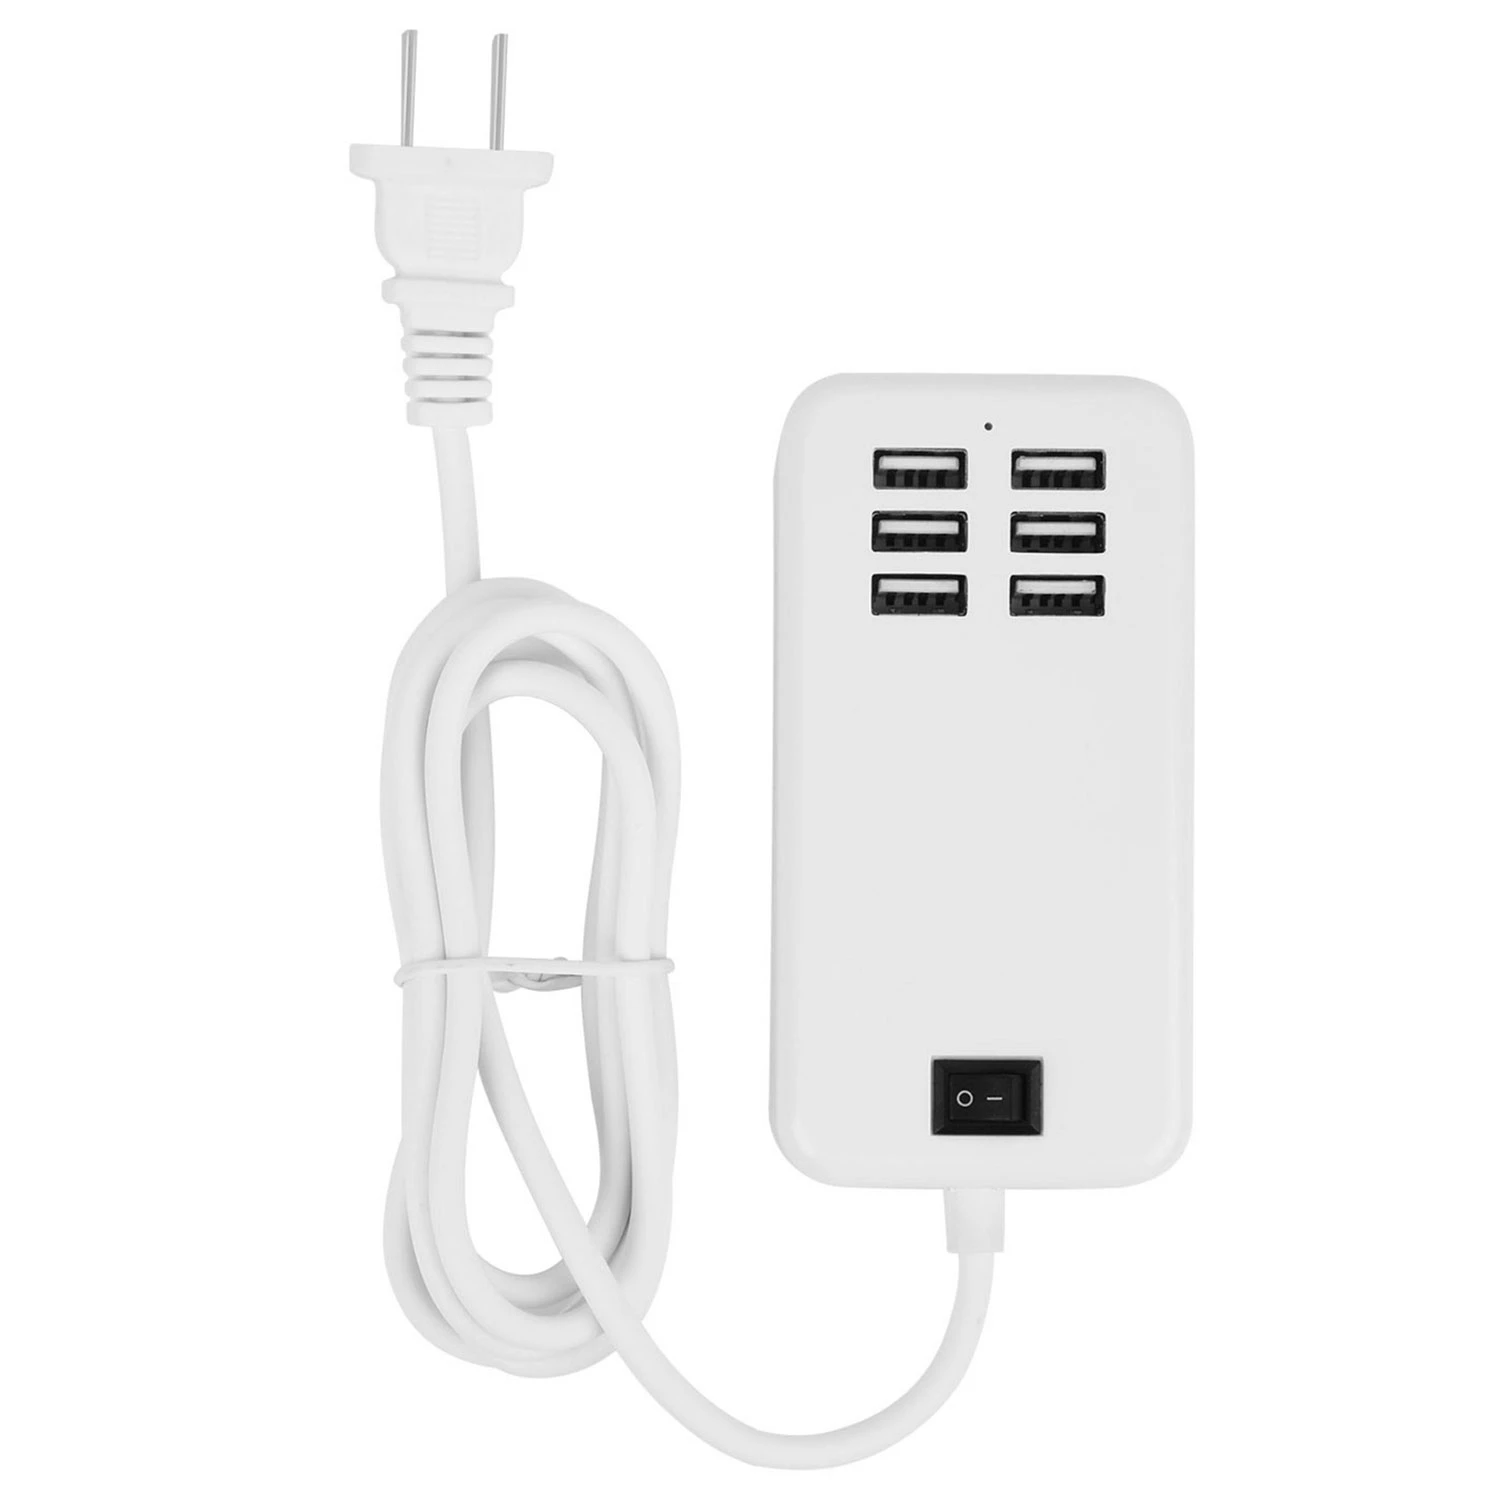 6-USB US AC Wall Charger